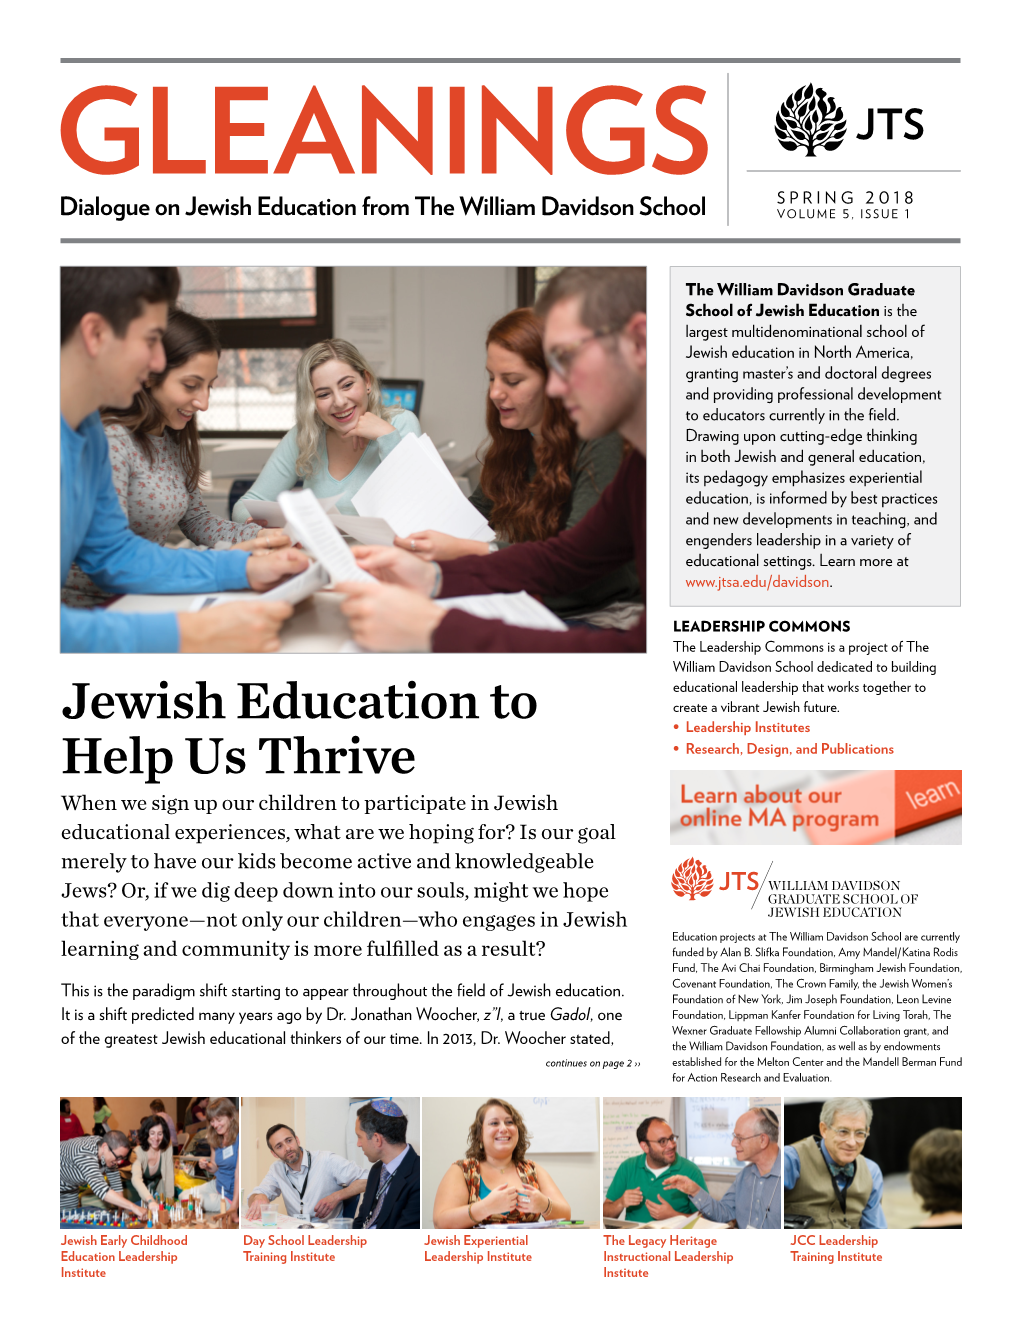 Jewish Education to Help Us Thrive | SPRING 2018, VOLUME 5, ISSUE 1